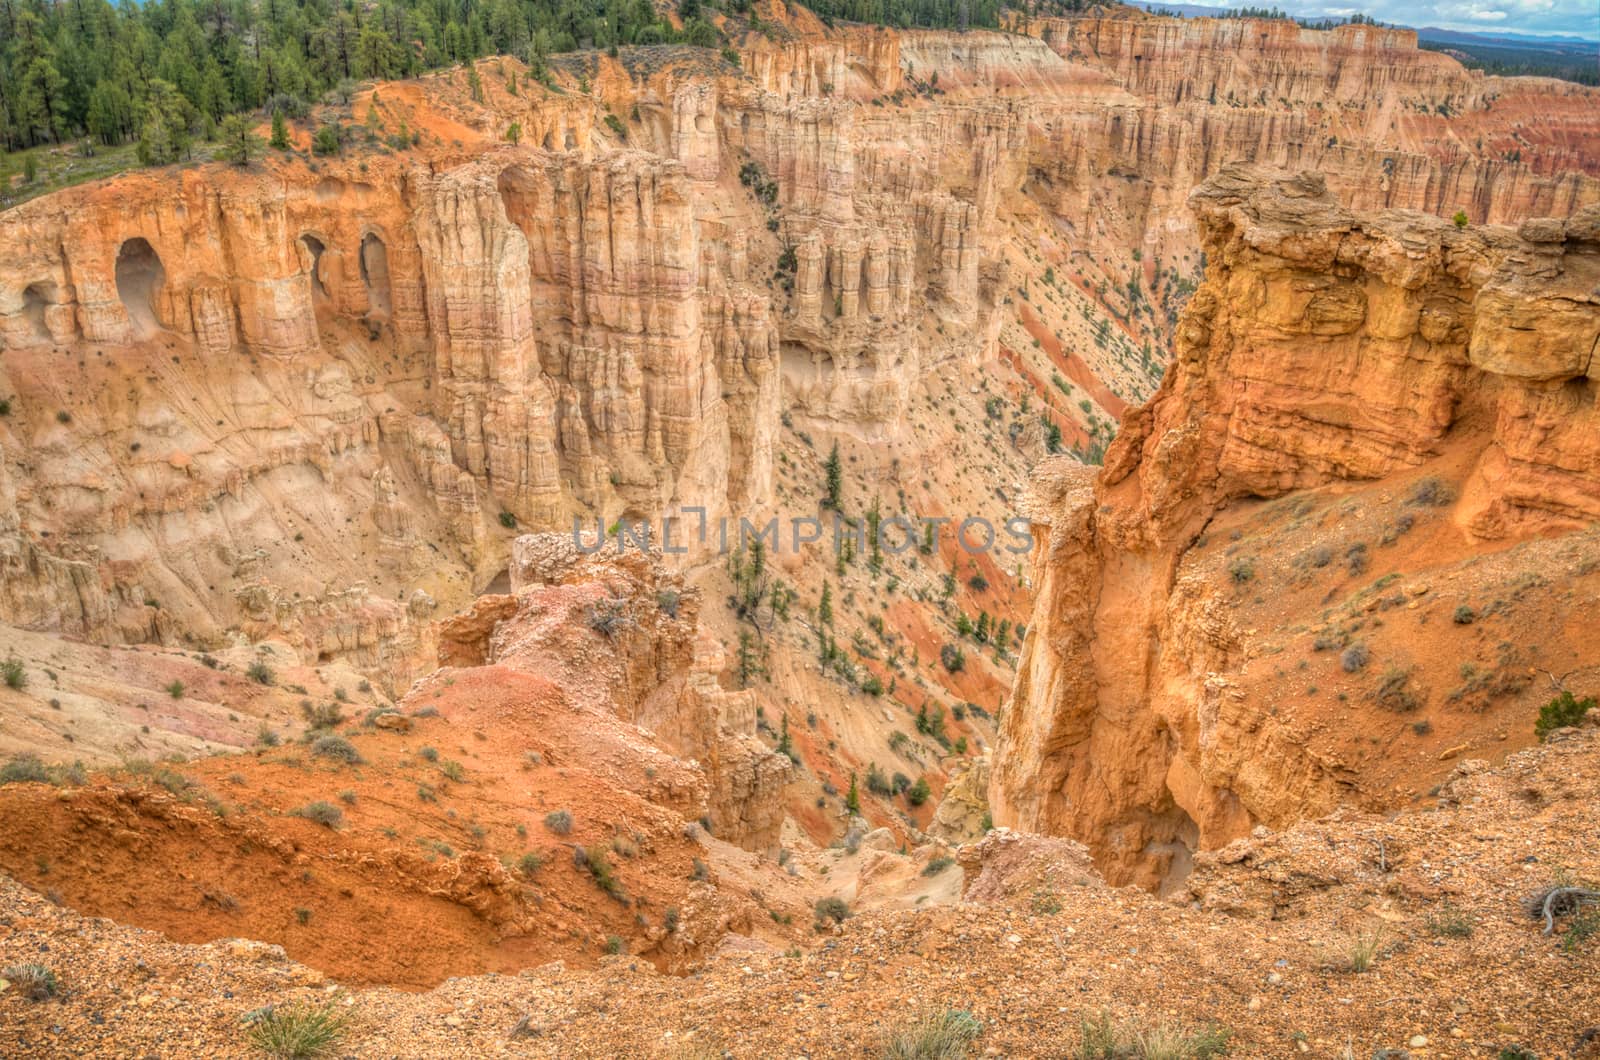 Bryce Canyon amphitheater west USA utah 2013 valley panoramic view